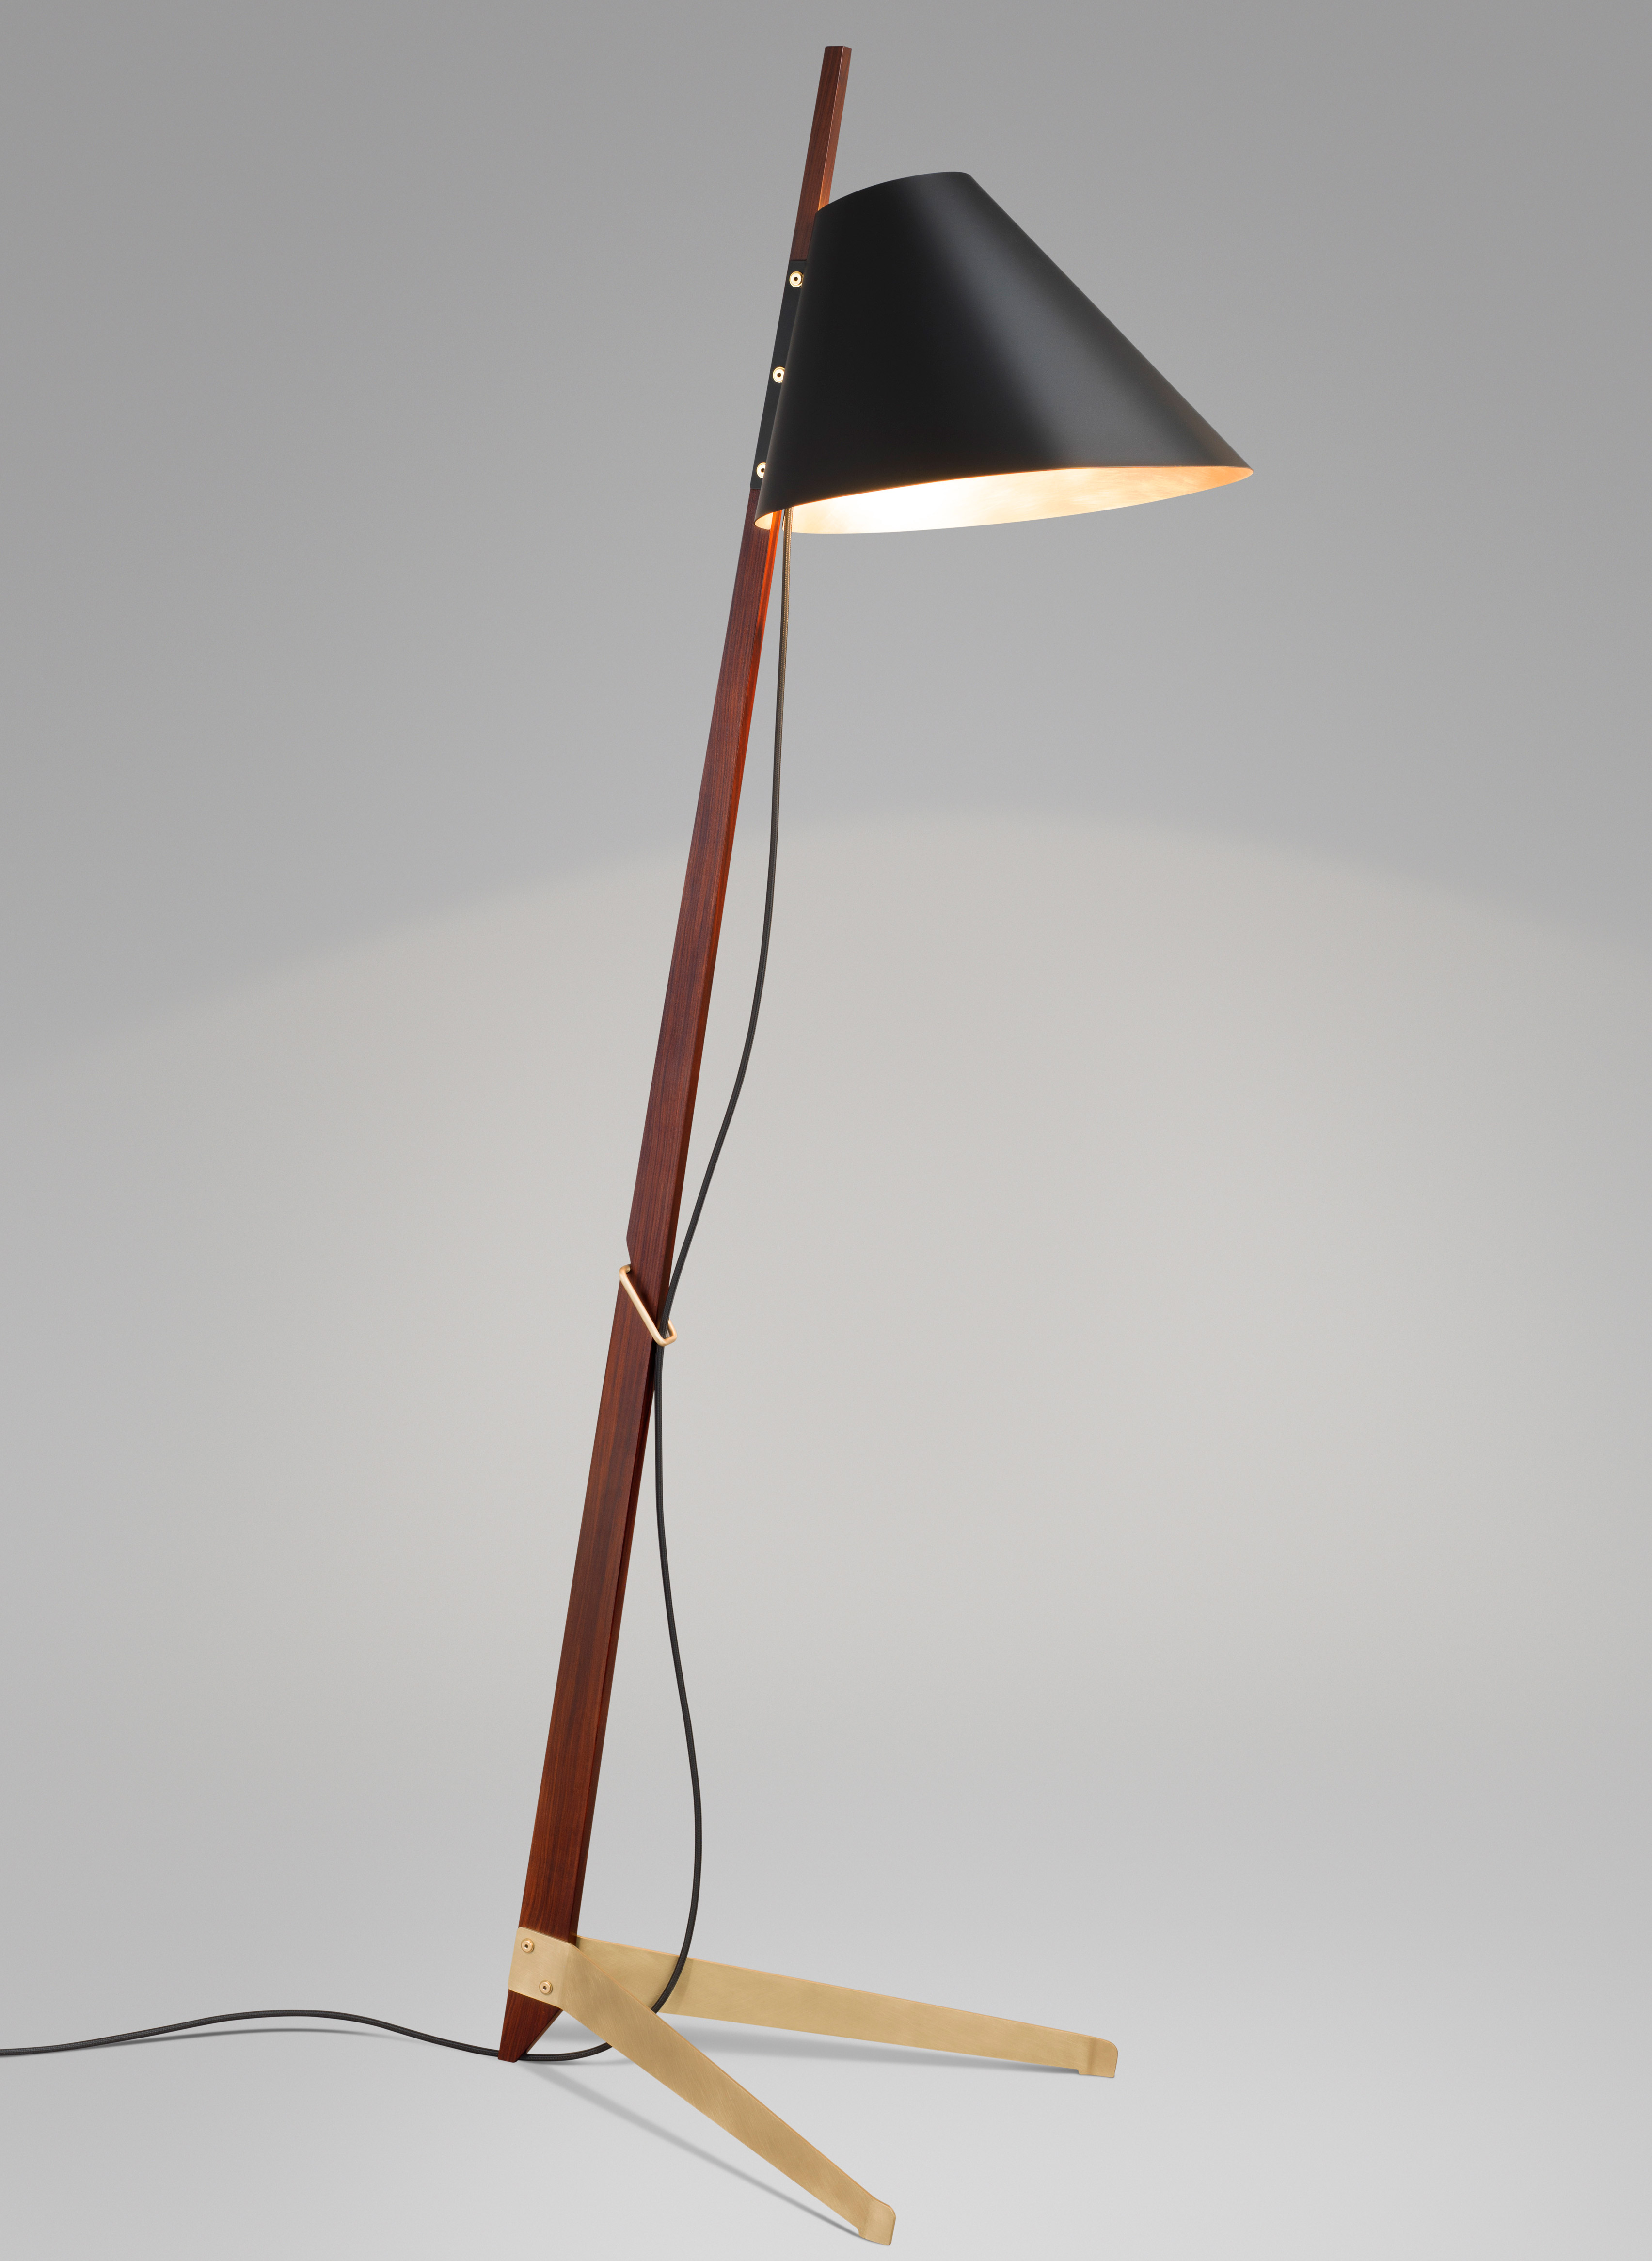 The material is echoed in the light's V shaped support, which fans out at the base of the lamp